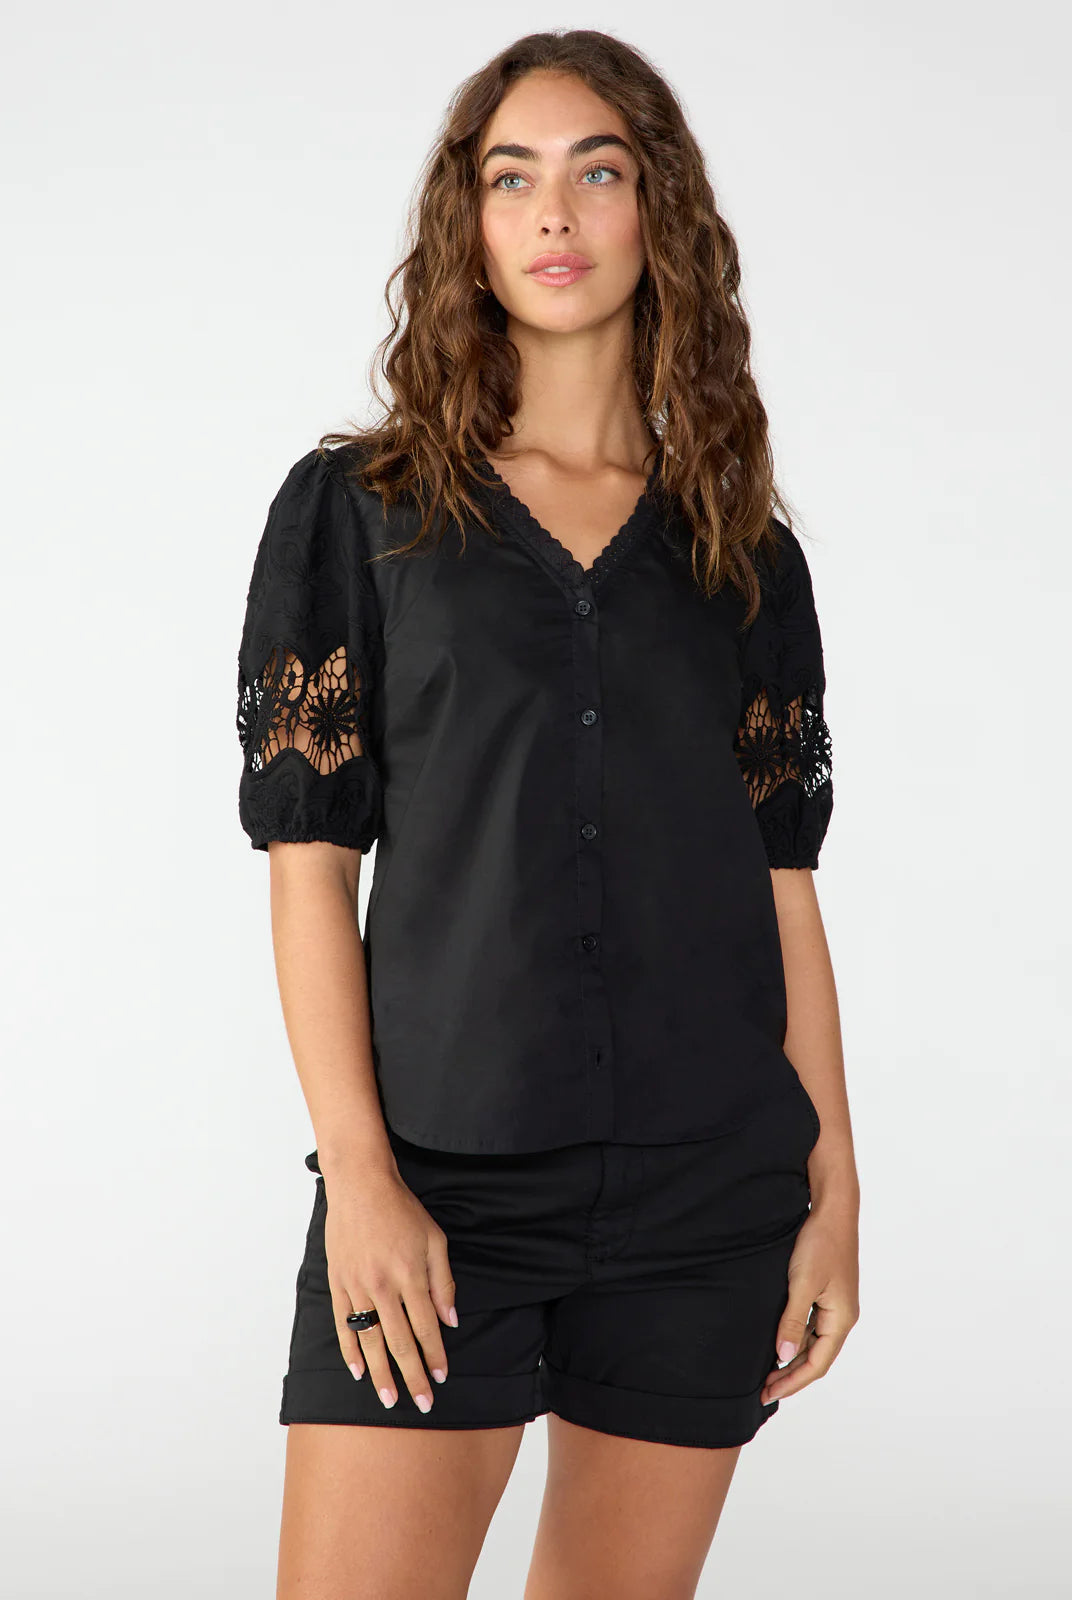 Puff Sleeve Black top Apex Ethical Boutique